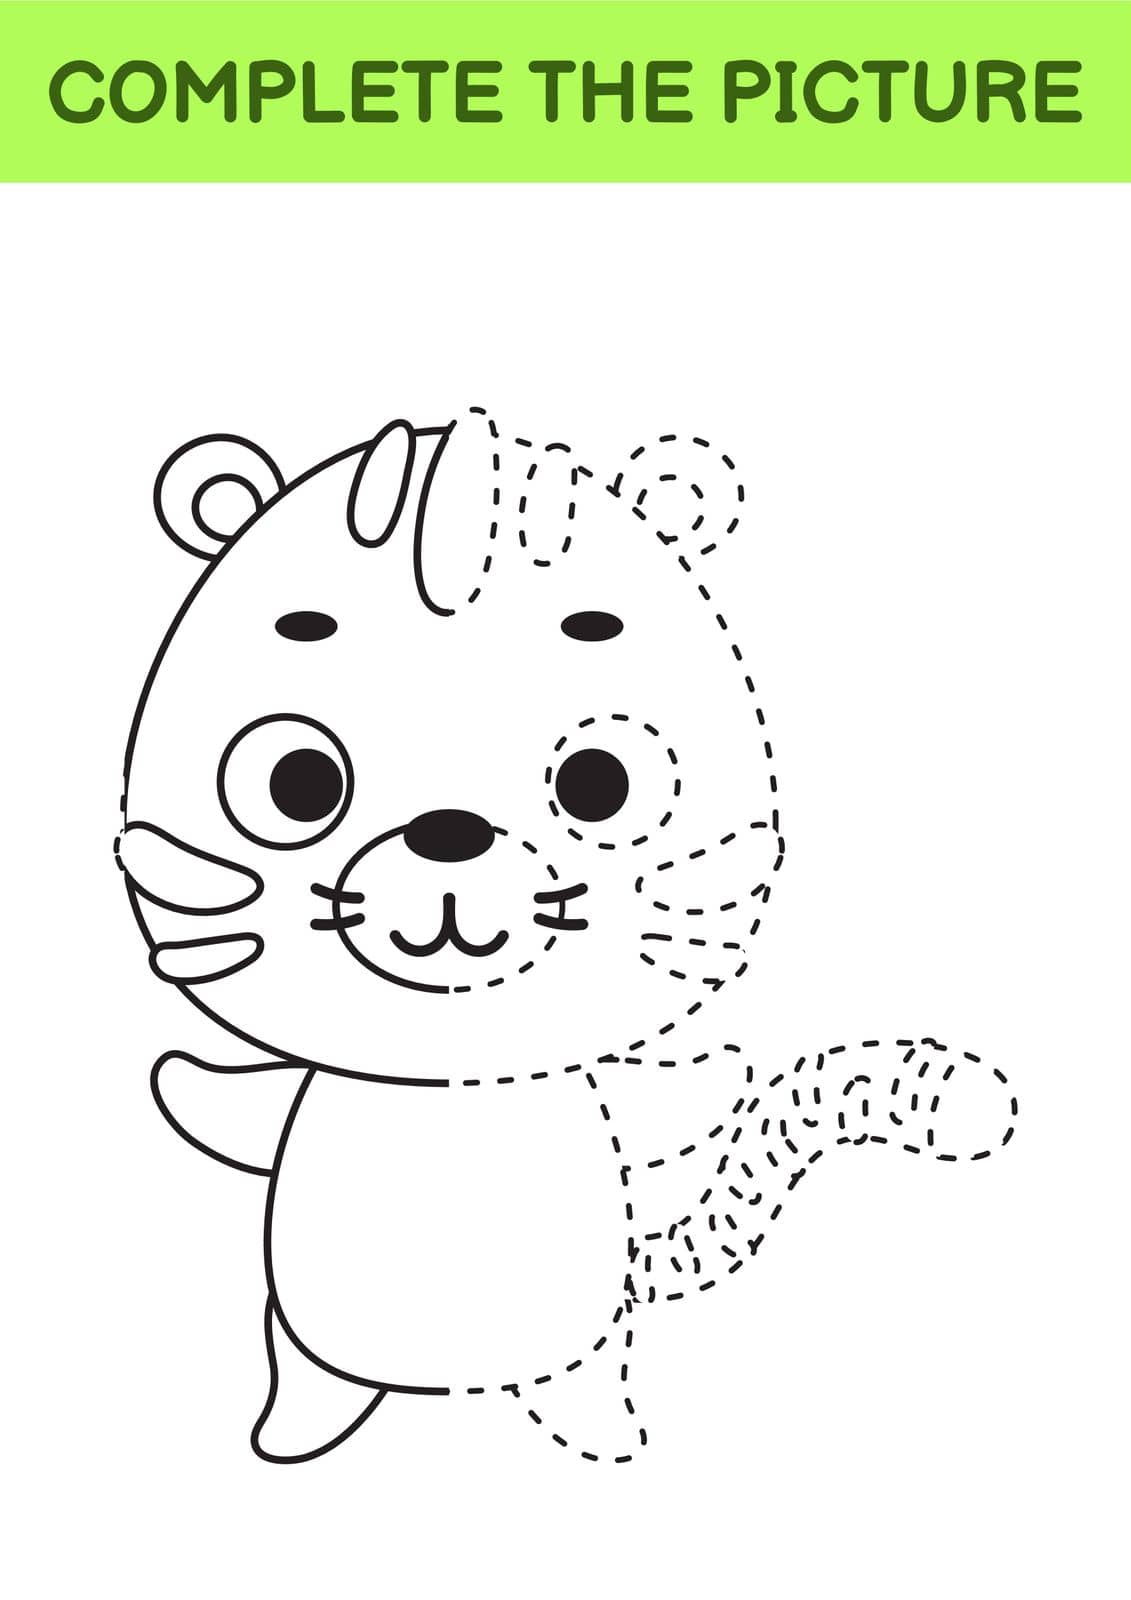 Complete drawn picture of cute tiger. Coloring book. Dot copy game. Handwriting practice, drawing skills training. Education developing printable worksheet. Activity page. Vector illustration